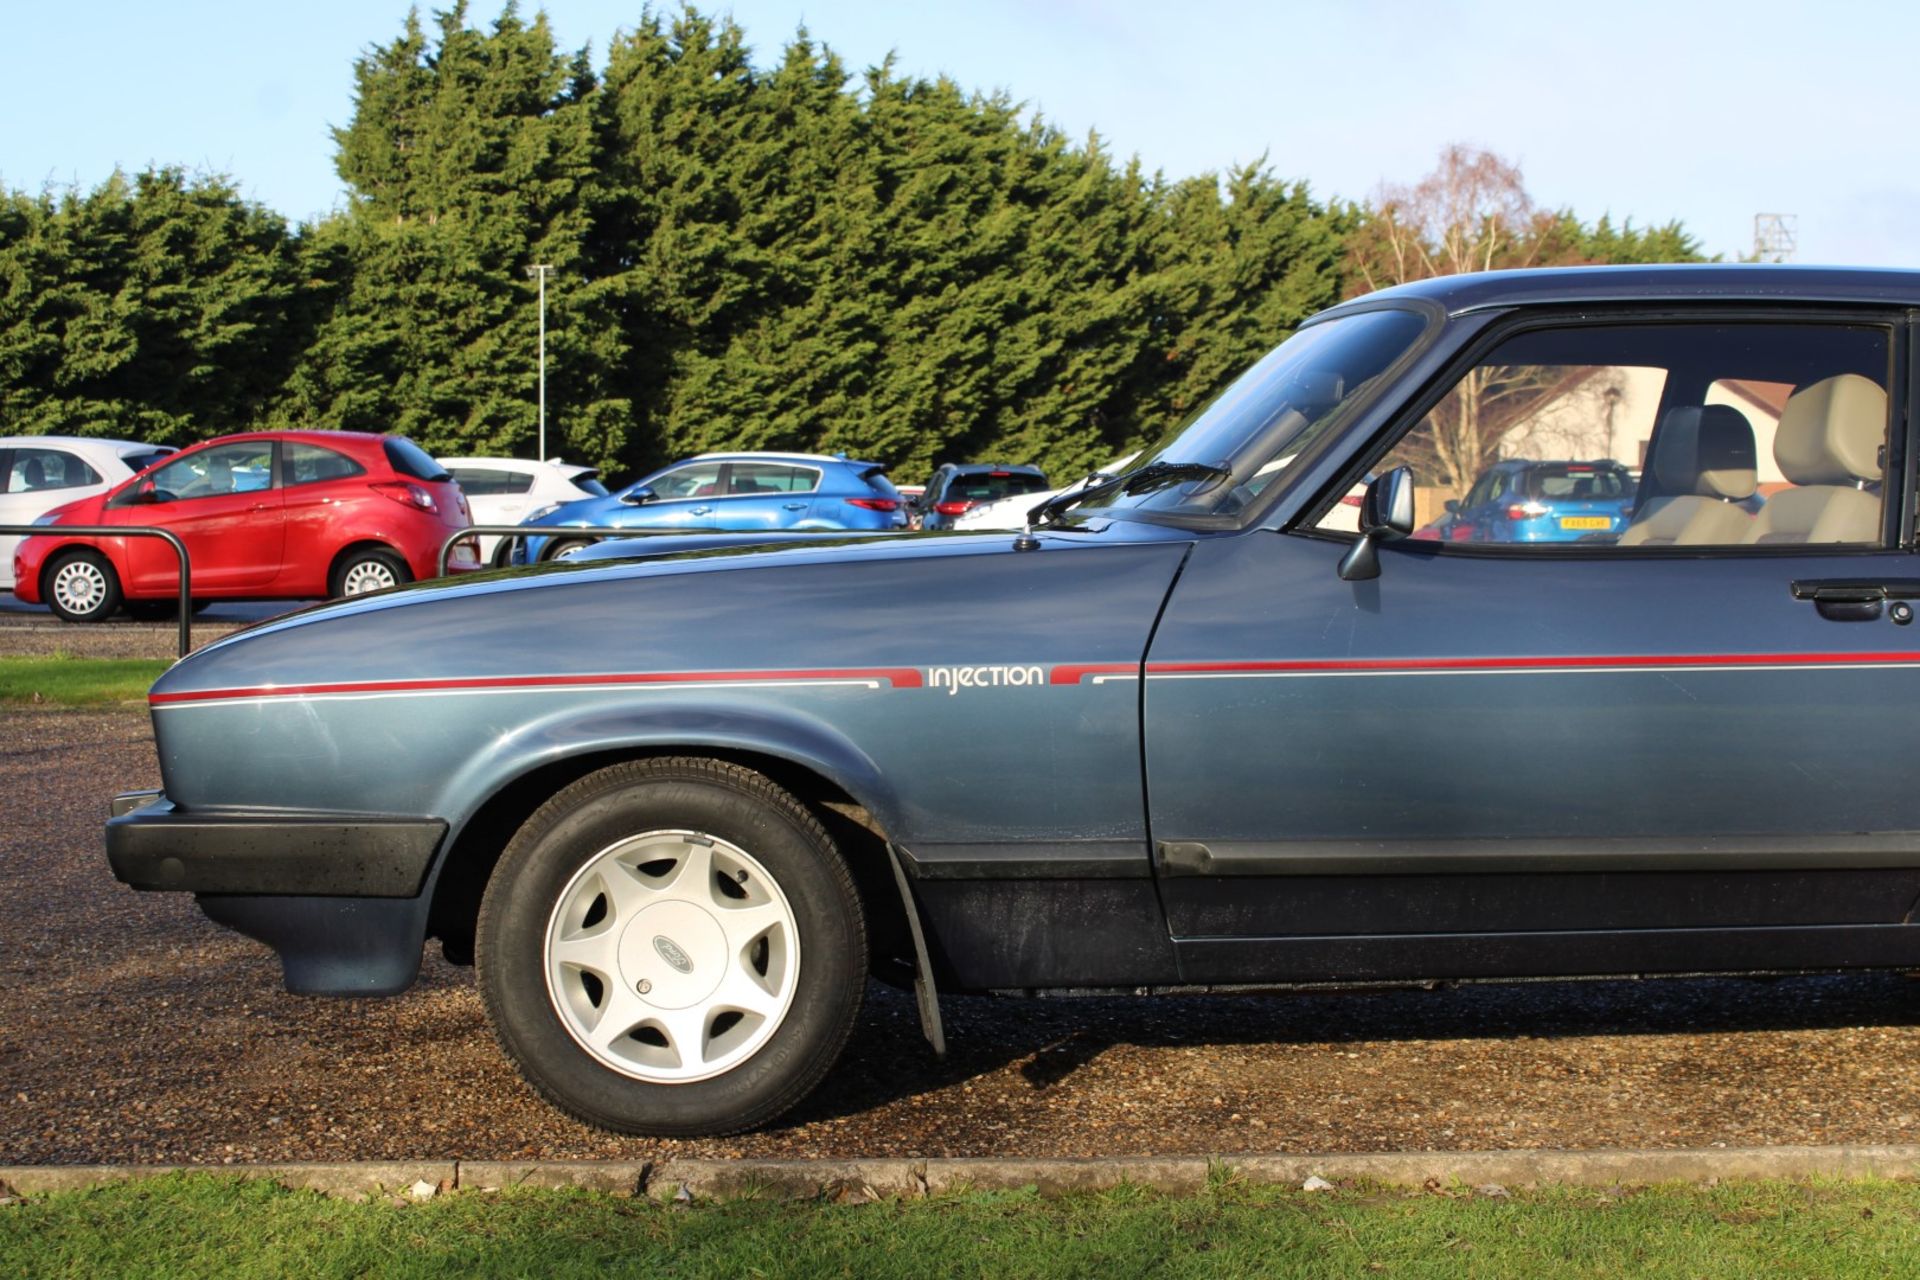 1985 Ford Capri 2.8 Injection Special 28,460 miles from new - Image 10 of 24